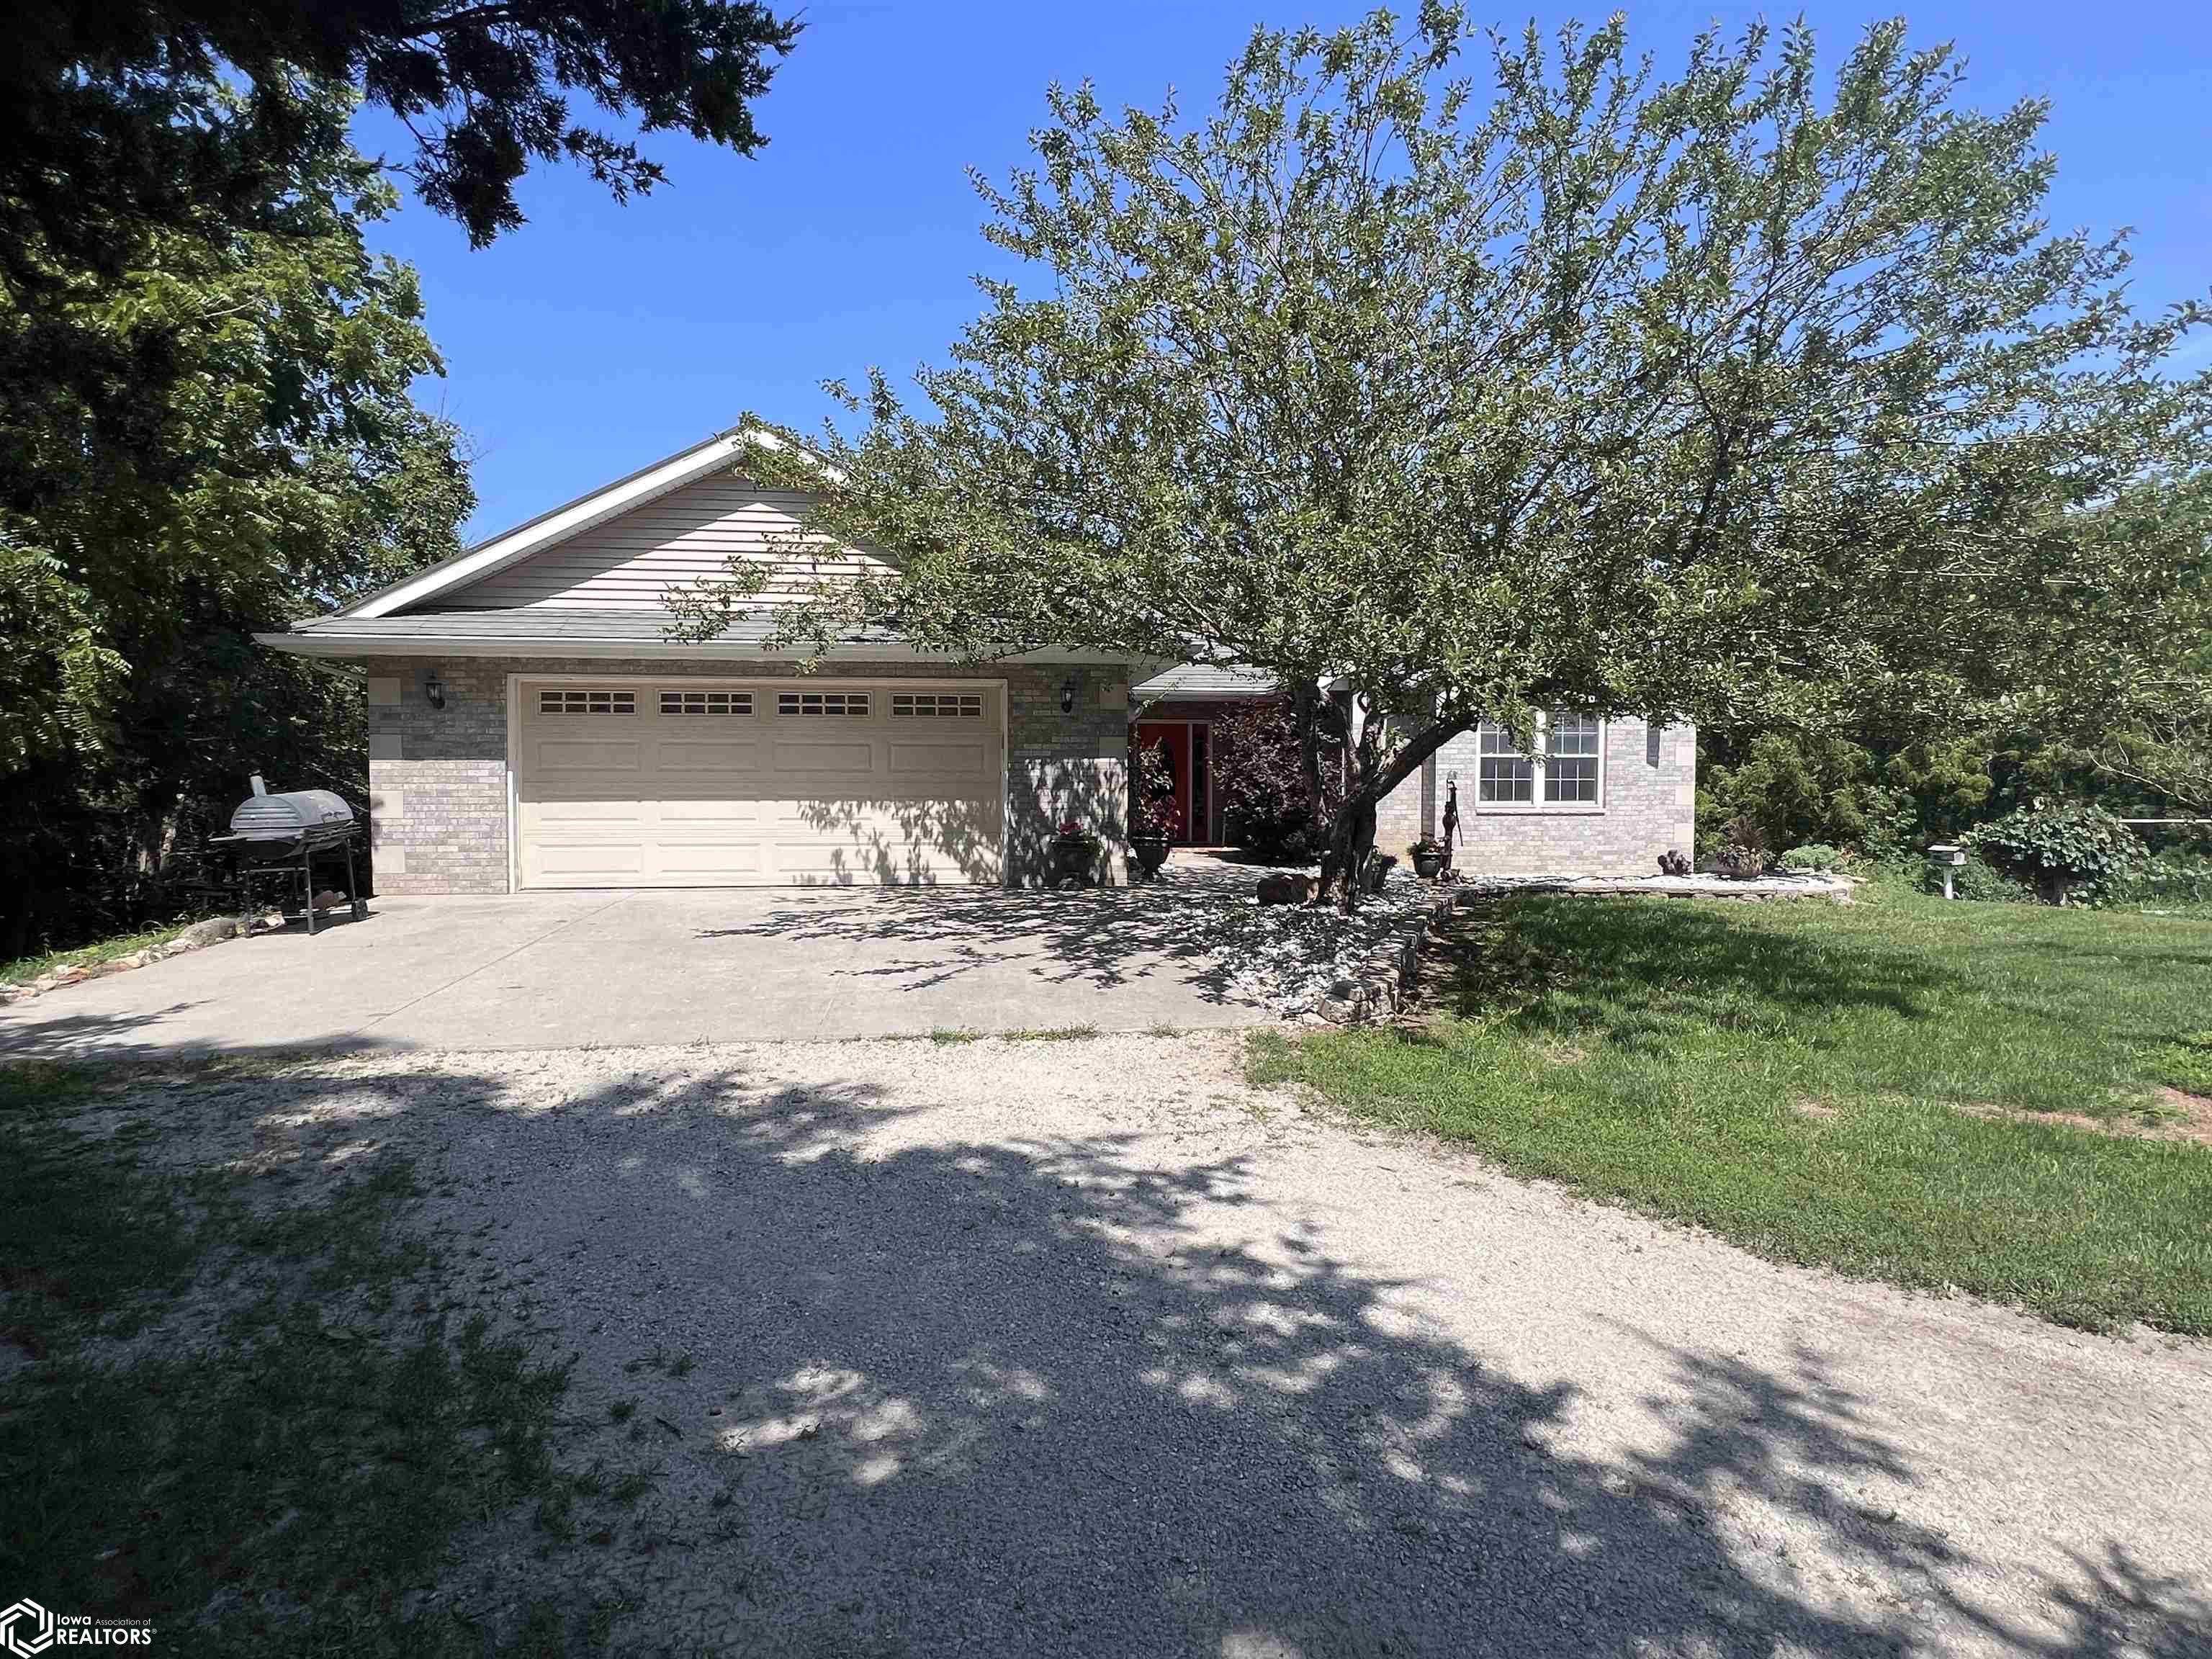 32049 285th, Richland, Iowa 52585, 3 Bedrooms Bedrooms, ,2 BathroomsBathrooms,Single Family,For Sale,285th,6309812